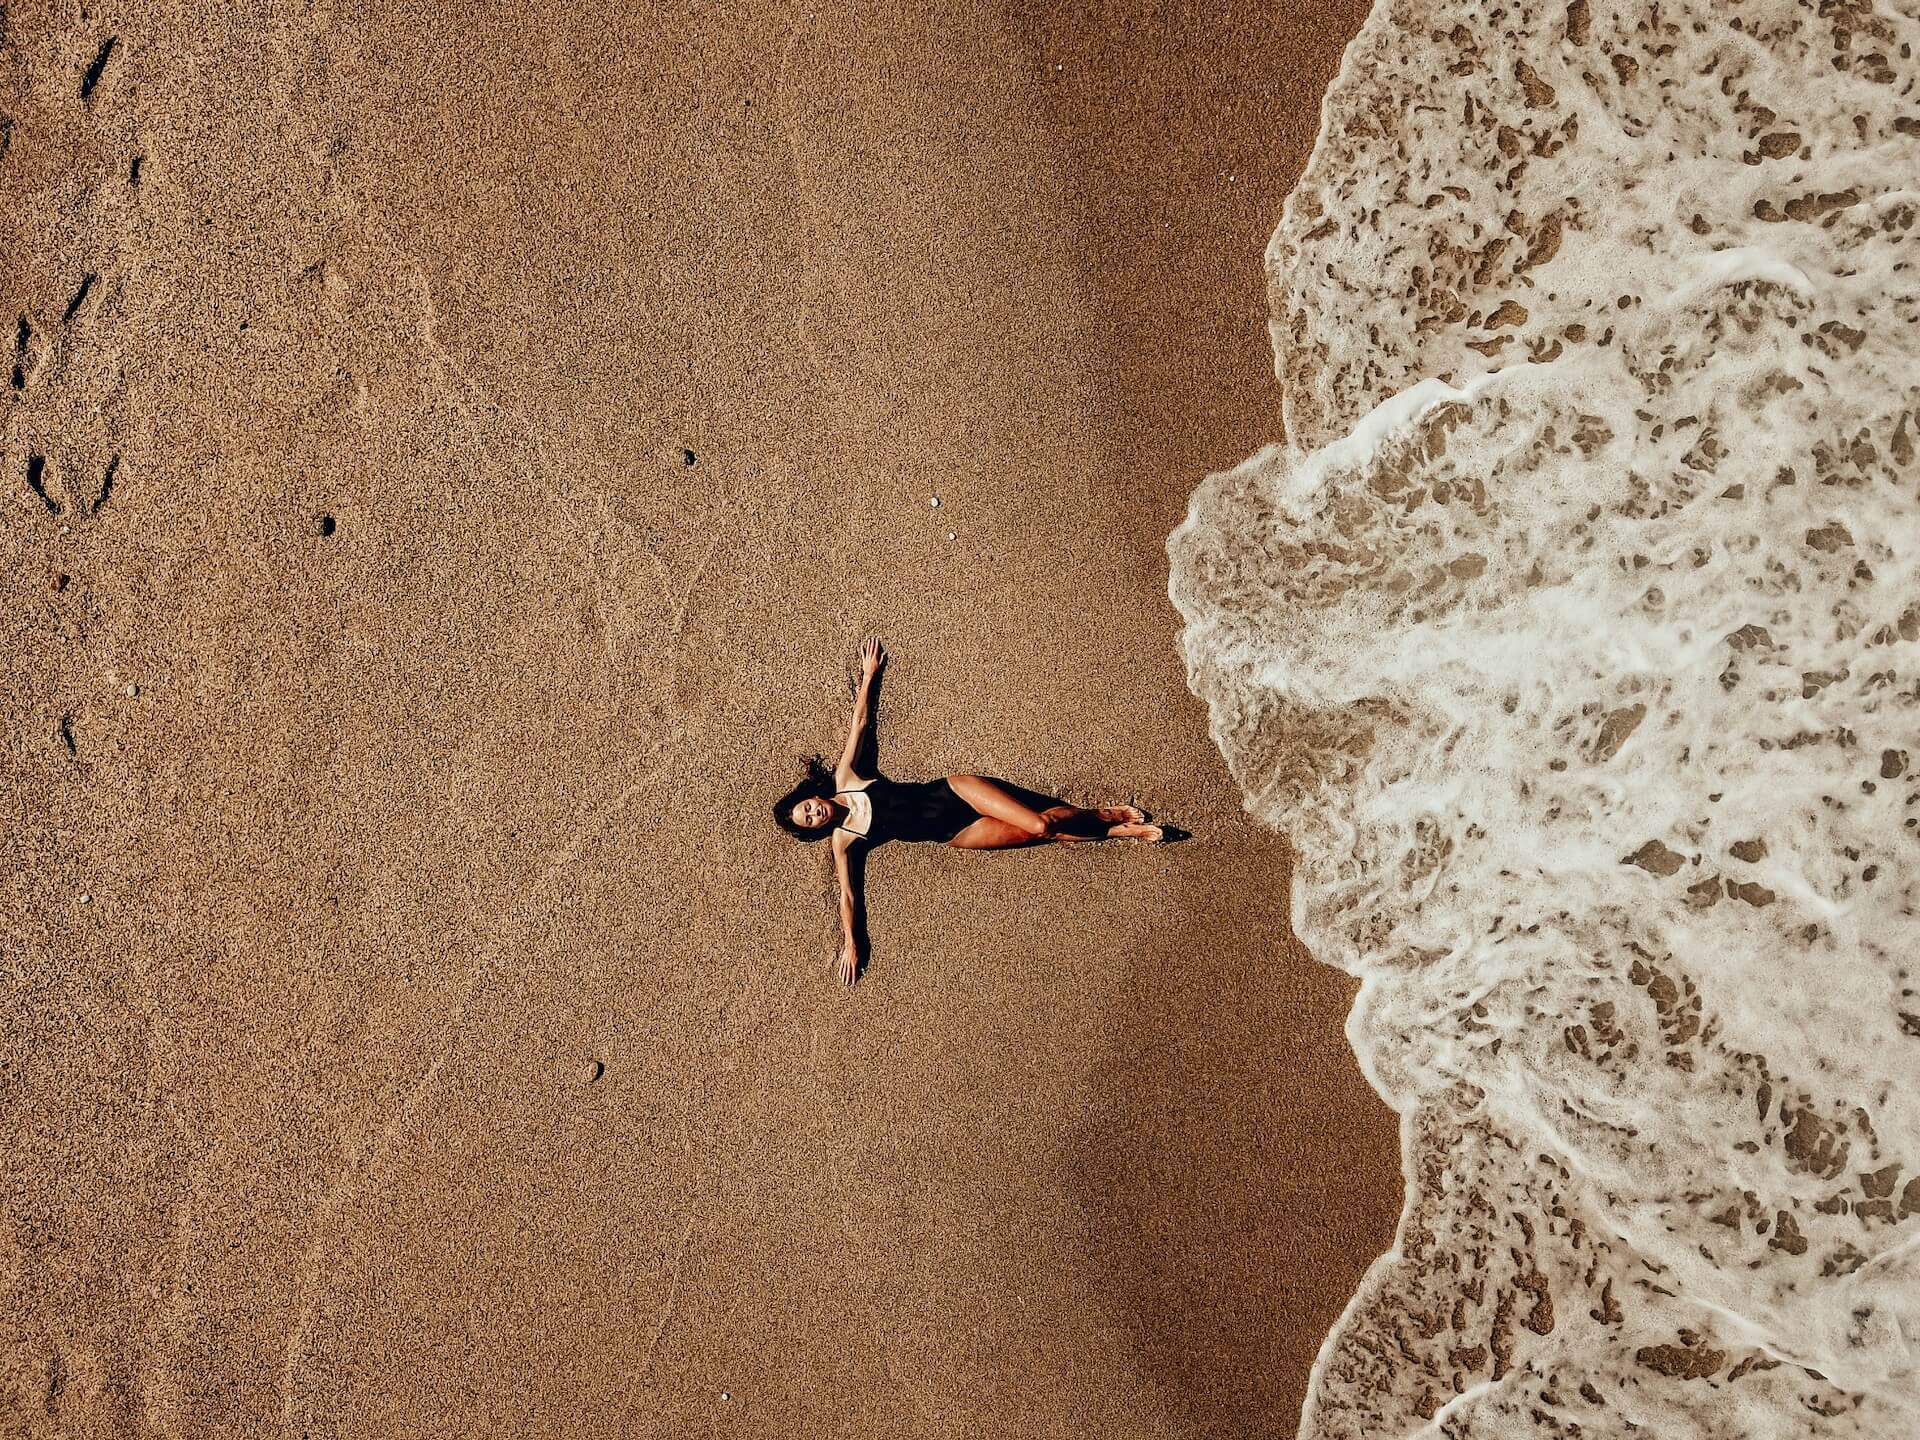 Girl lying on the sand while the wave is coming towards her